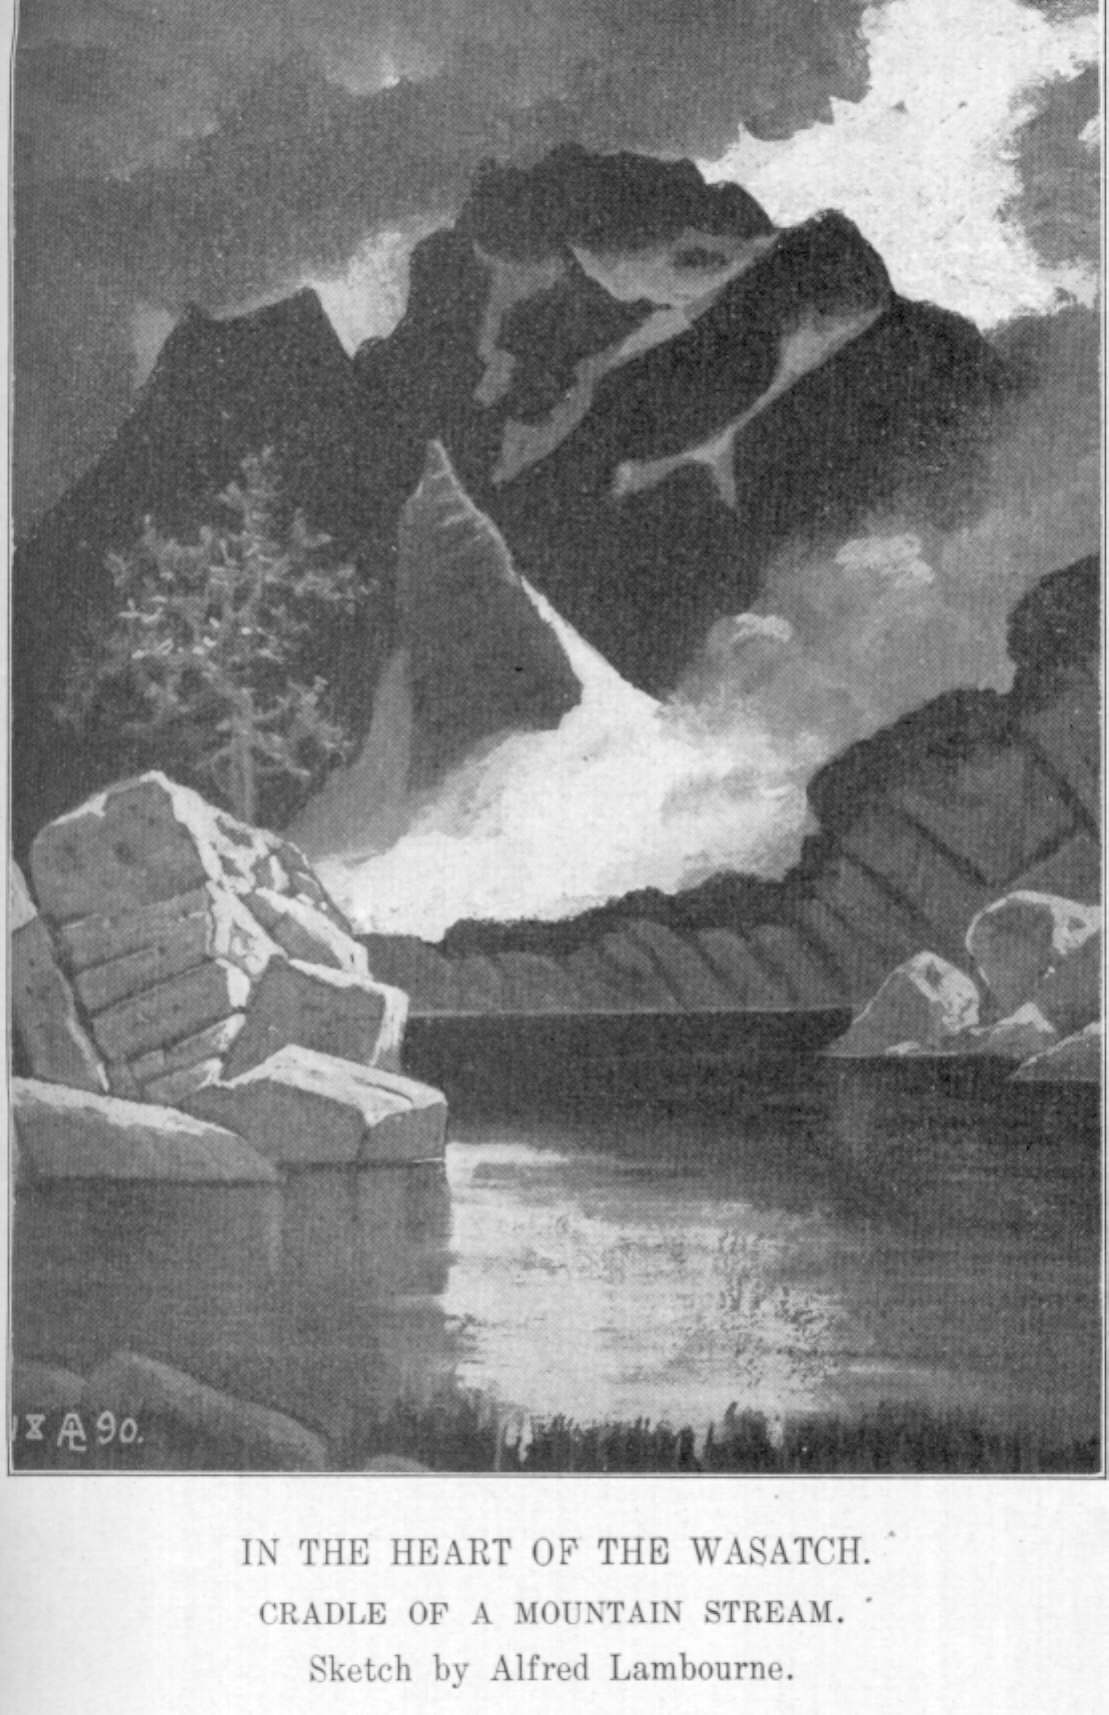 In the Heart of the Wasatch - Cradle of a Mountain Stream - Sketch by Alfred Lambourne